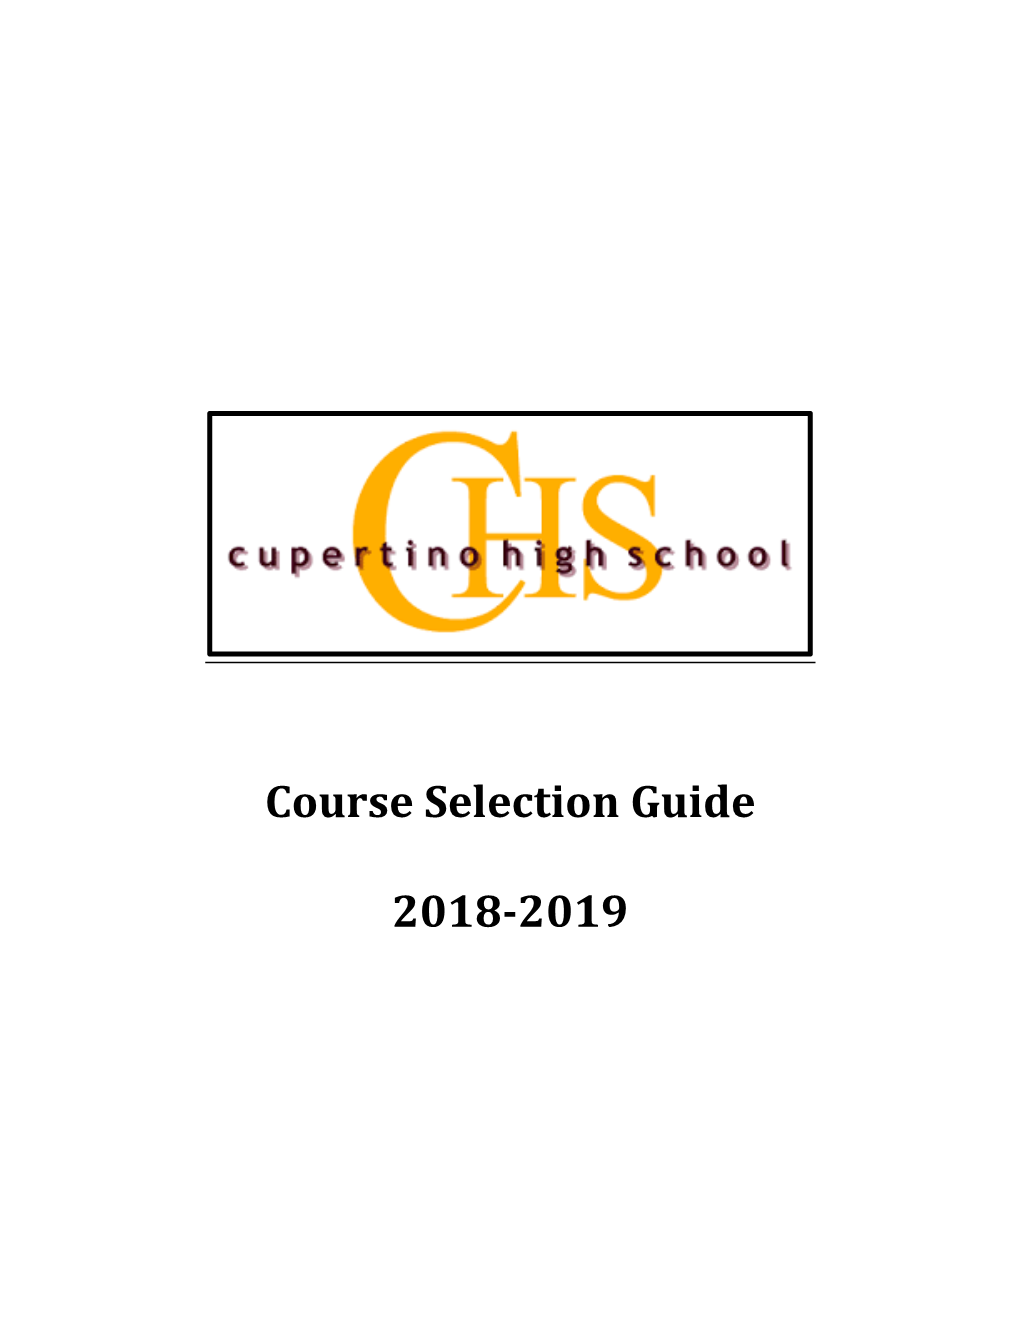 CHS Course Selection Guide 2018-19